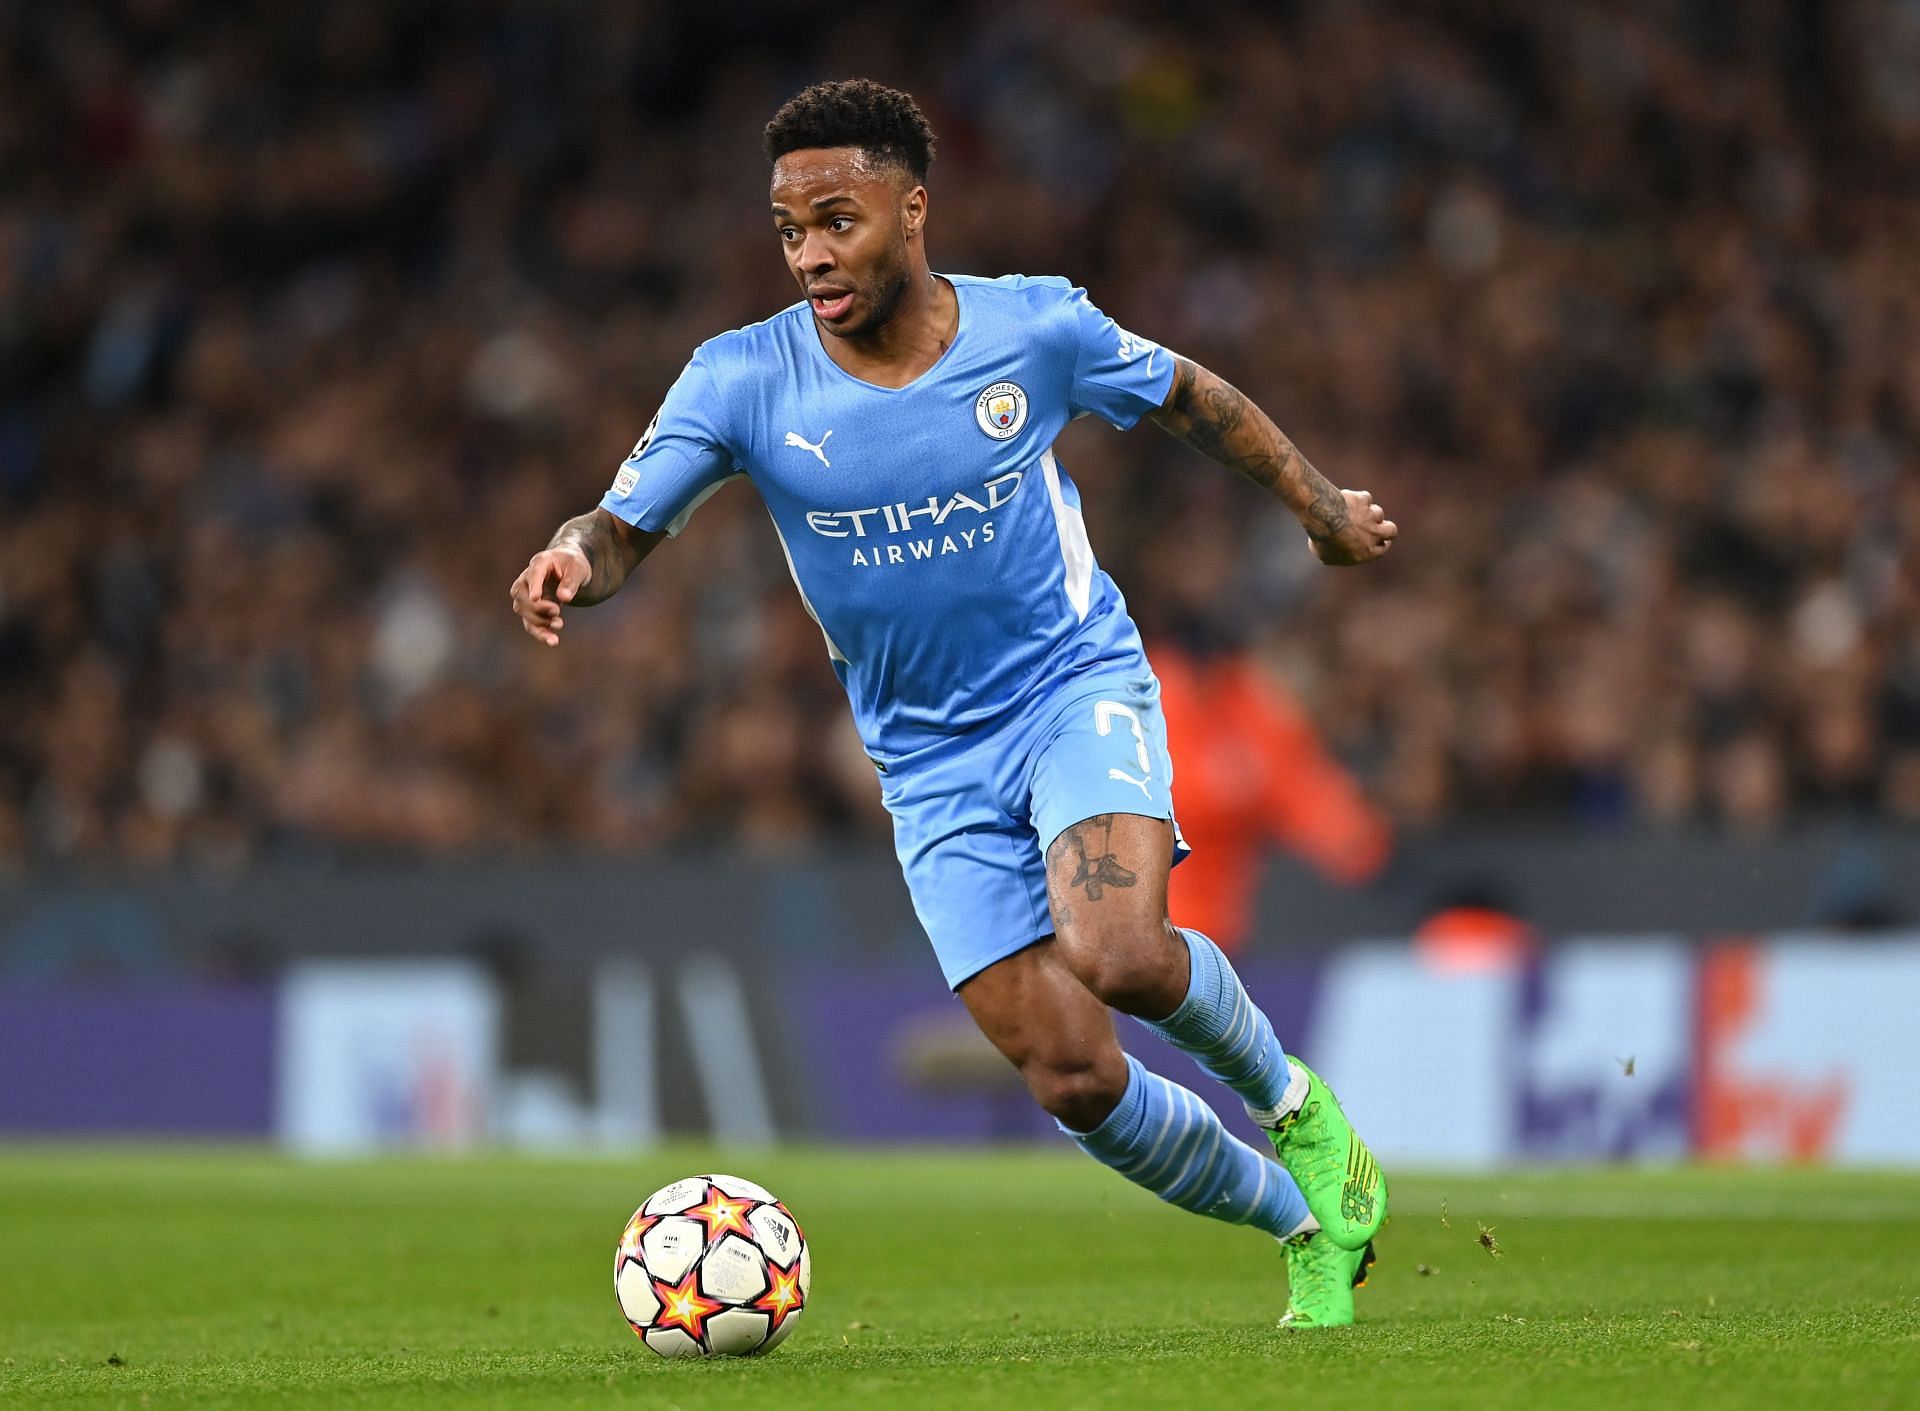 Raheem Sterling looks likely to depart Manchester City this summer after more than half a decade.